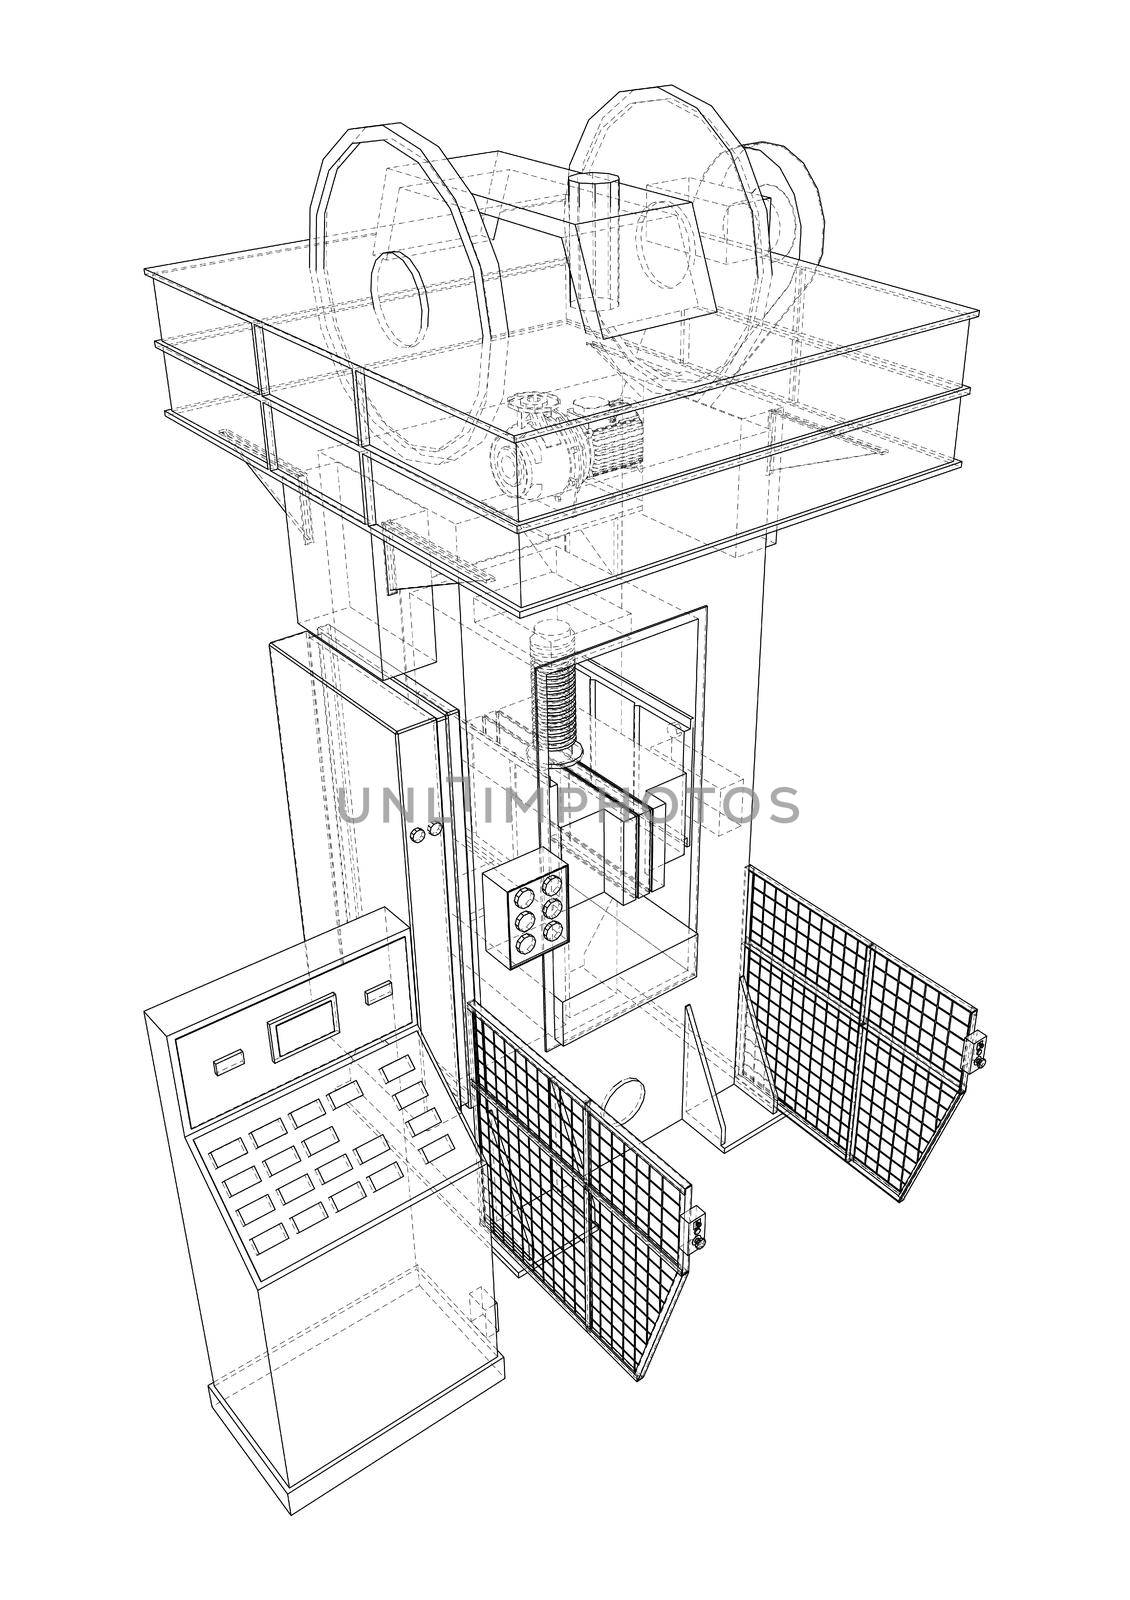 Hydraulic Press. 3d illustration. Wire-frame or blueprint style